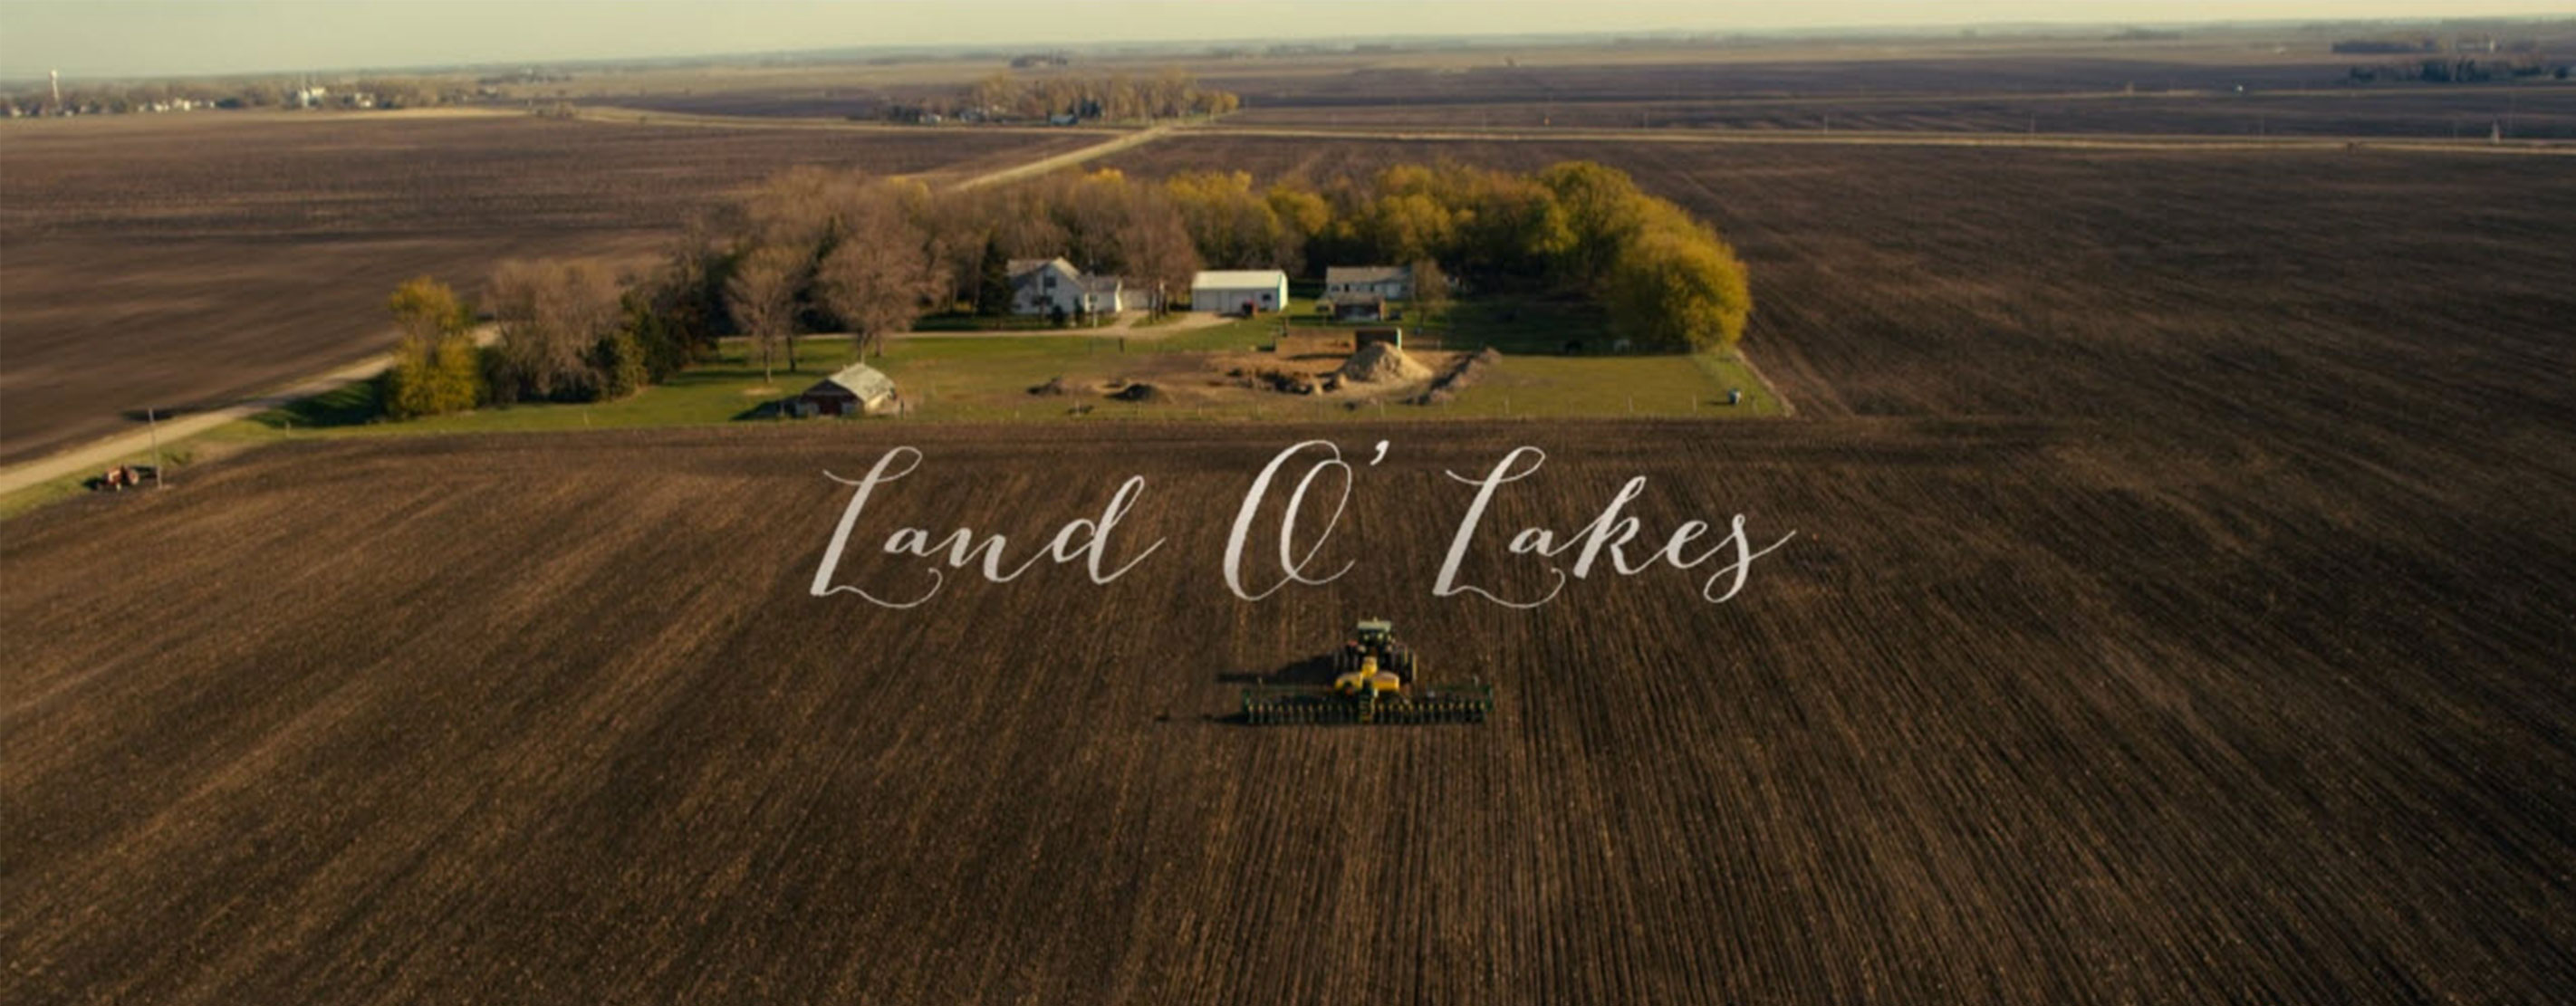 An Aerial View Of A Large Farm With The Text Land O